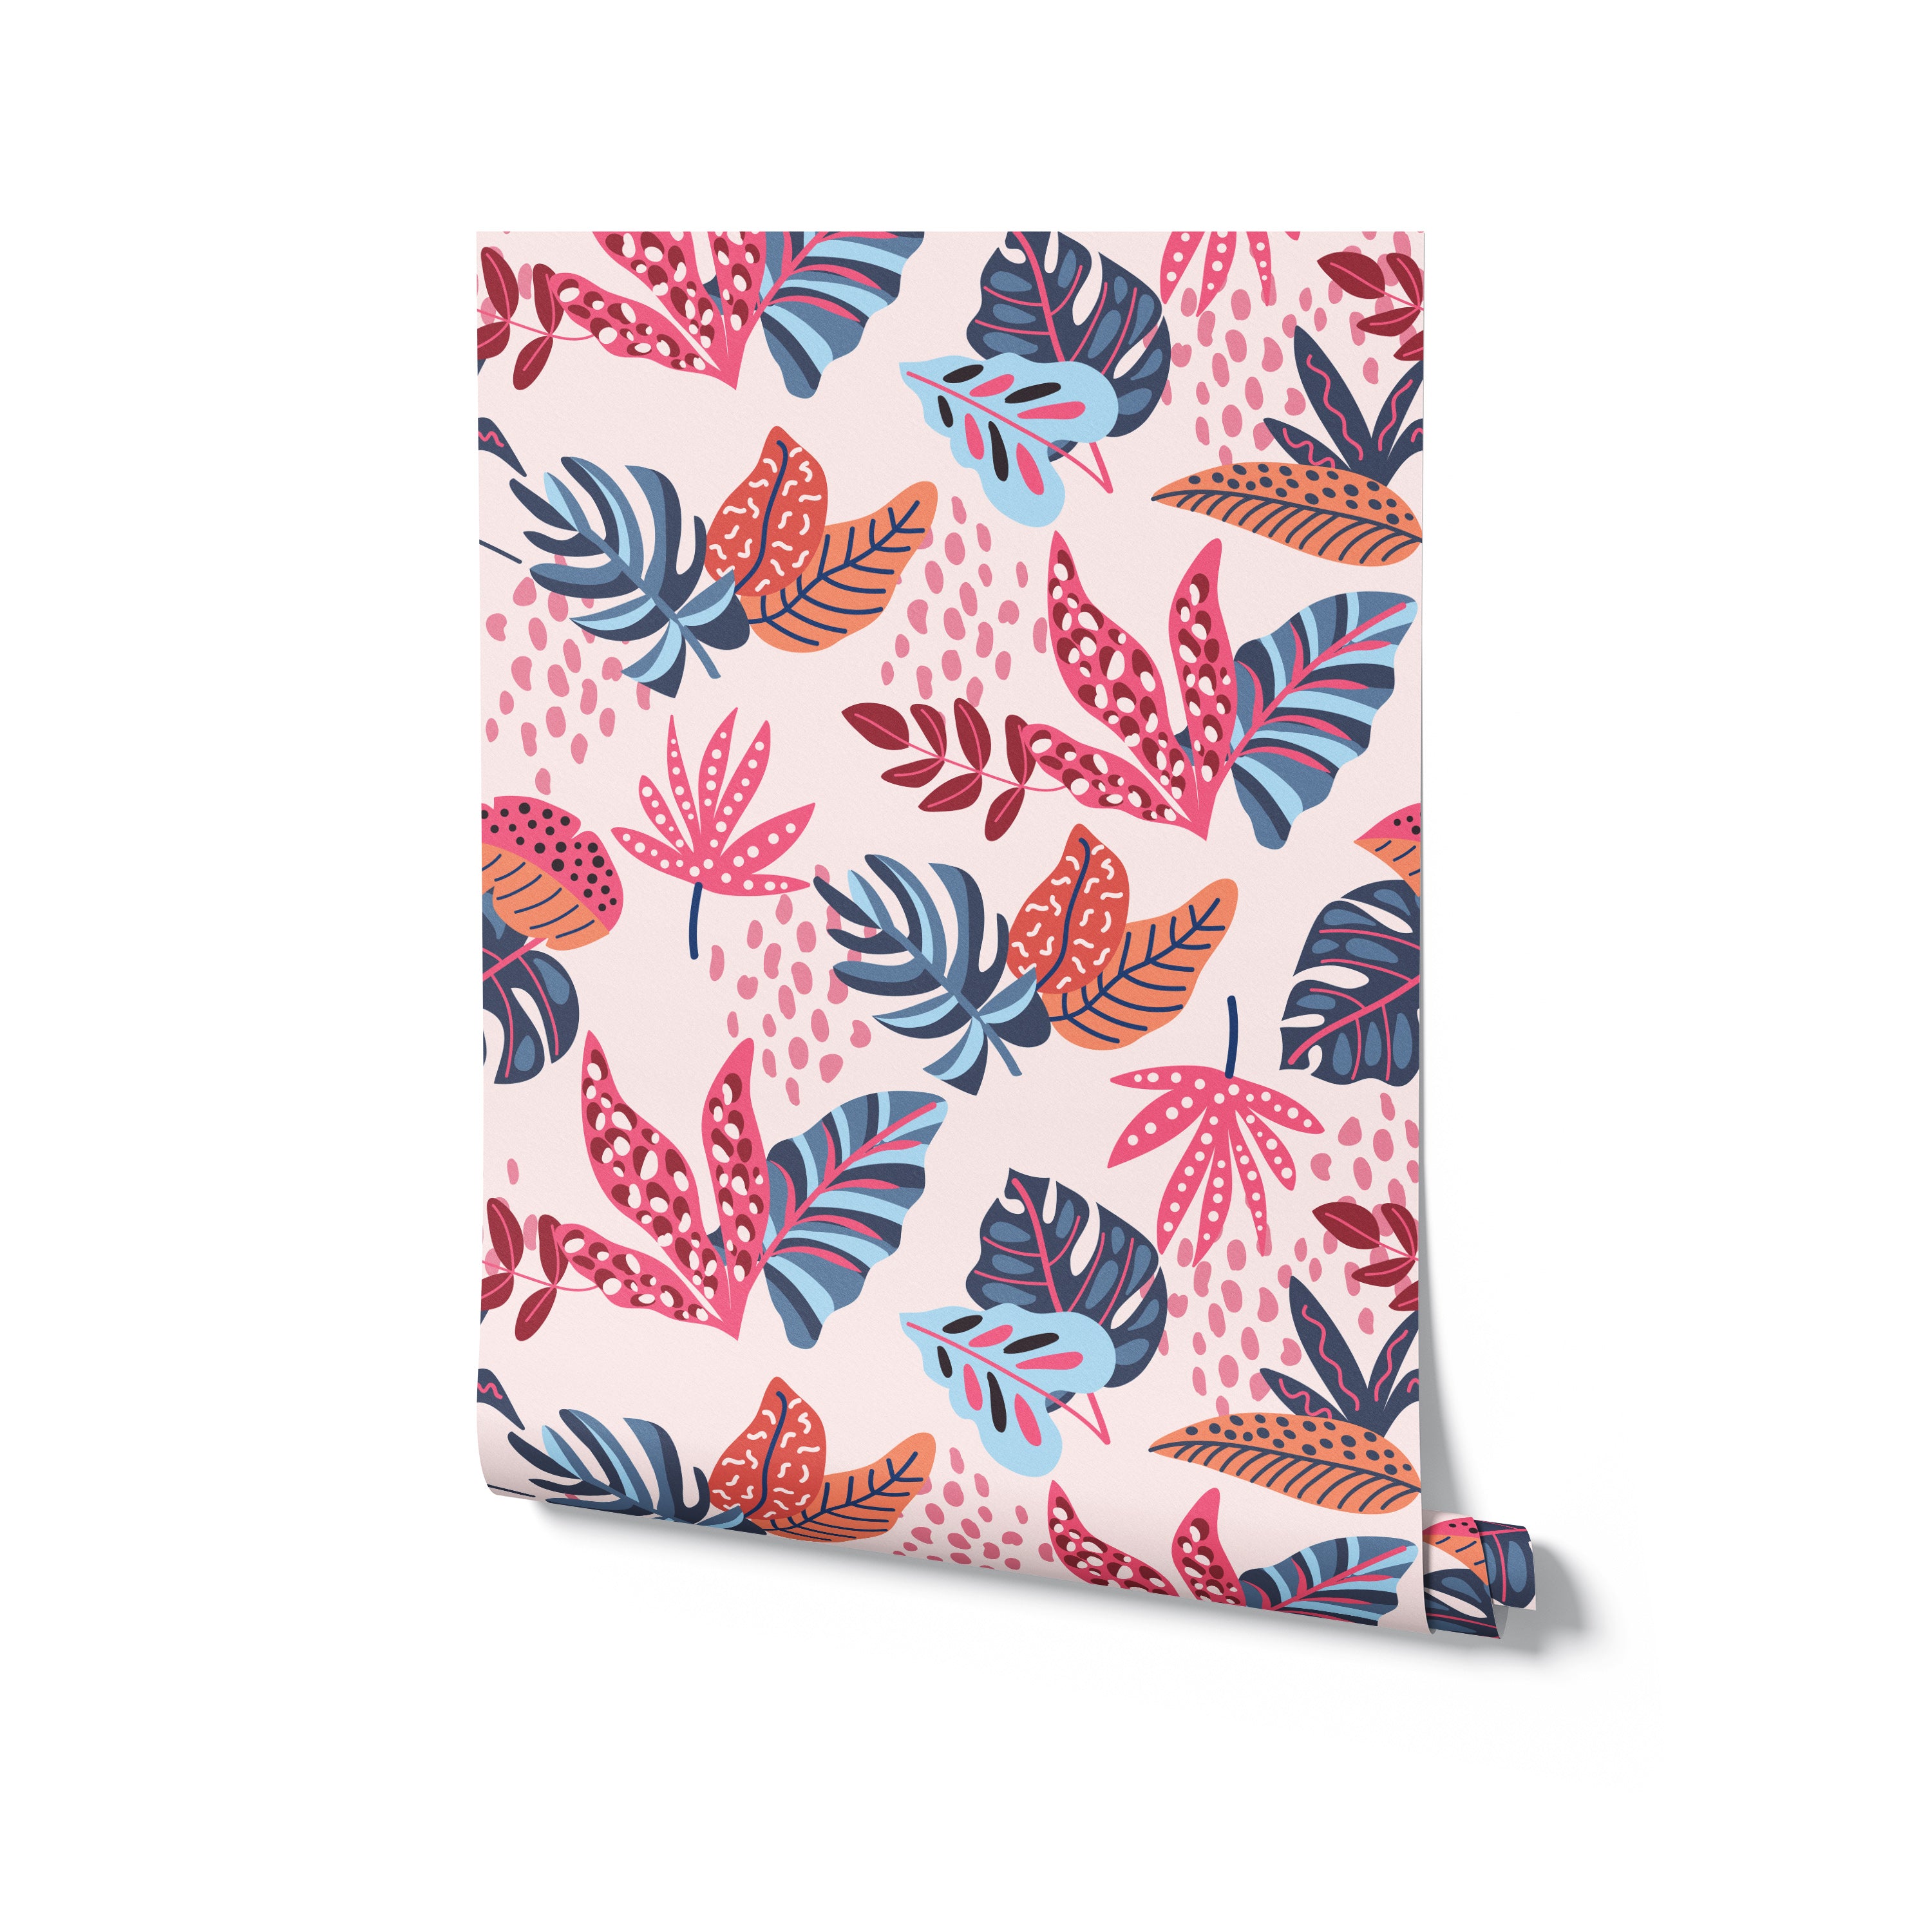 A single roll of Exotic Paradise wallpaper unrolled to display its dynamic pattern of tropical leaves in pink, blue, and orange on a light beige background.